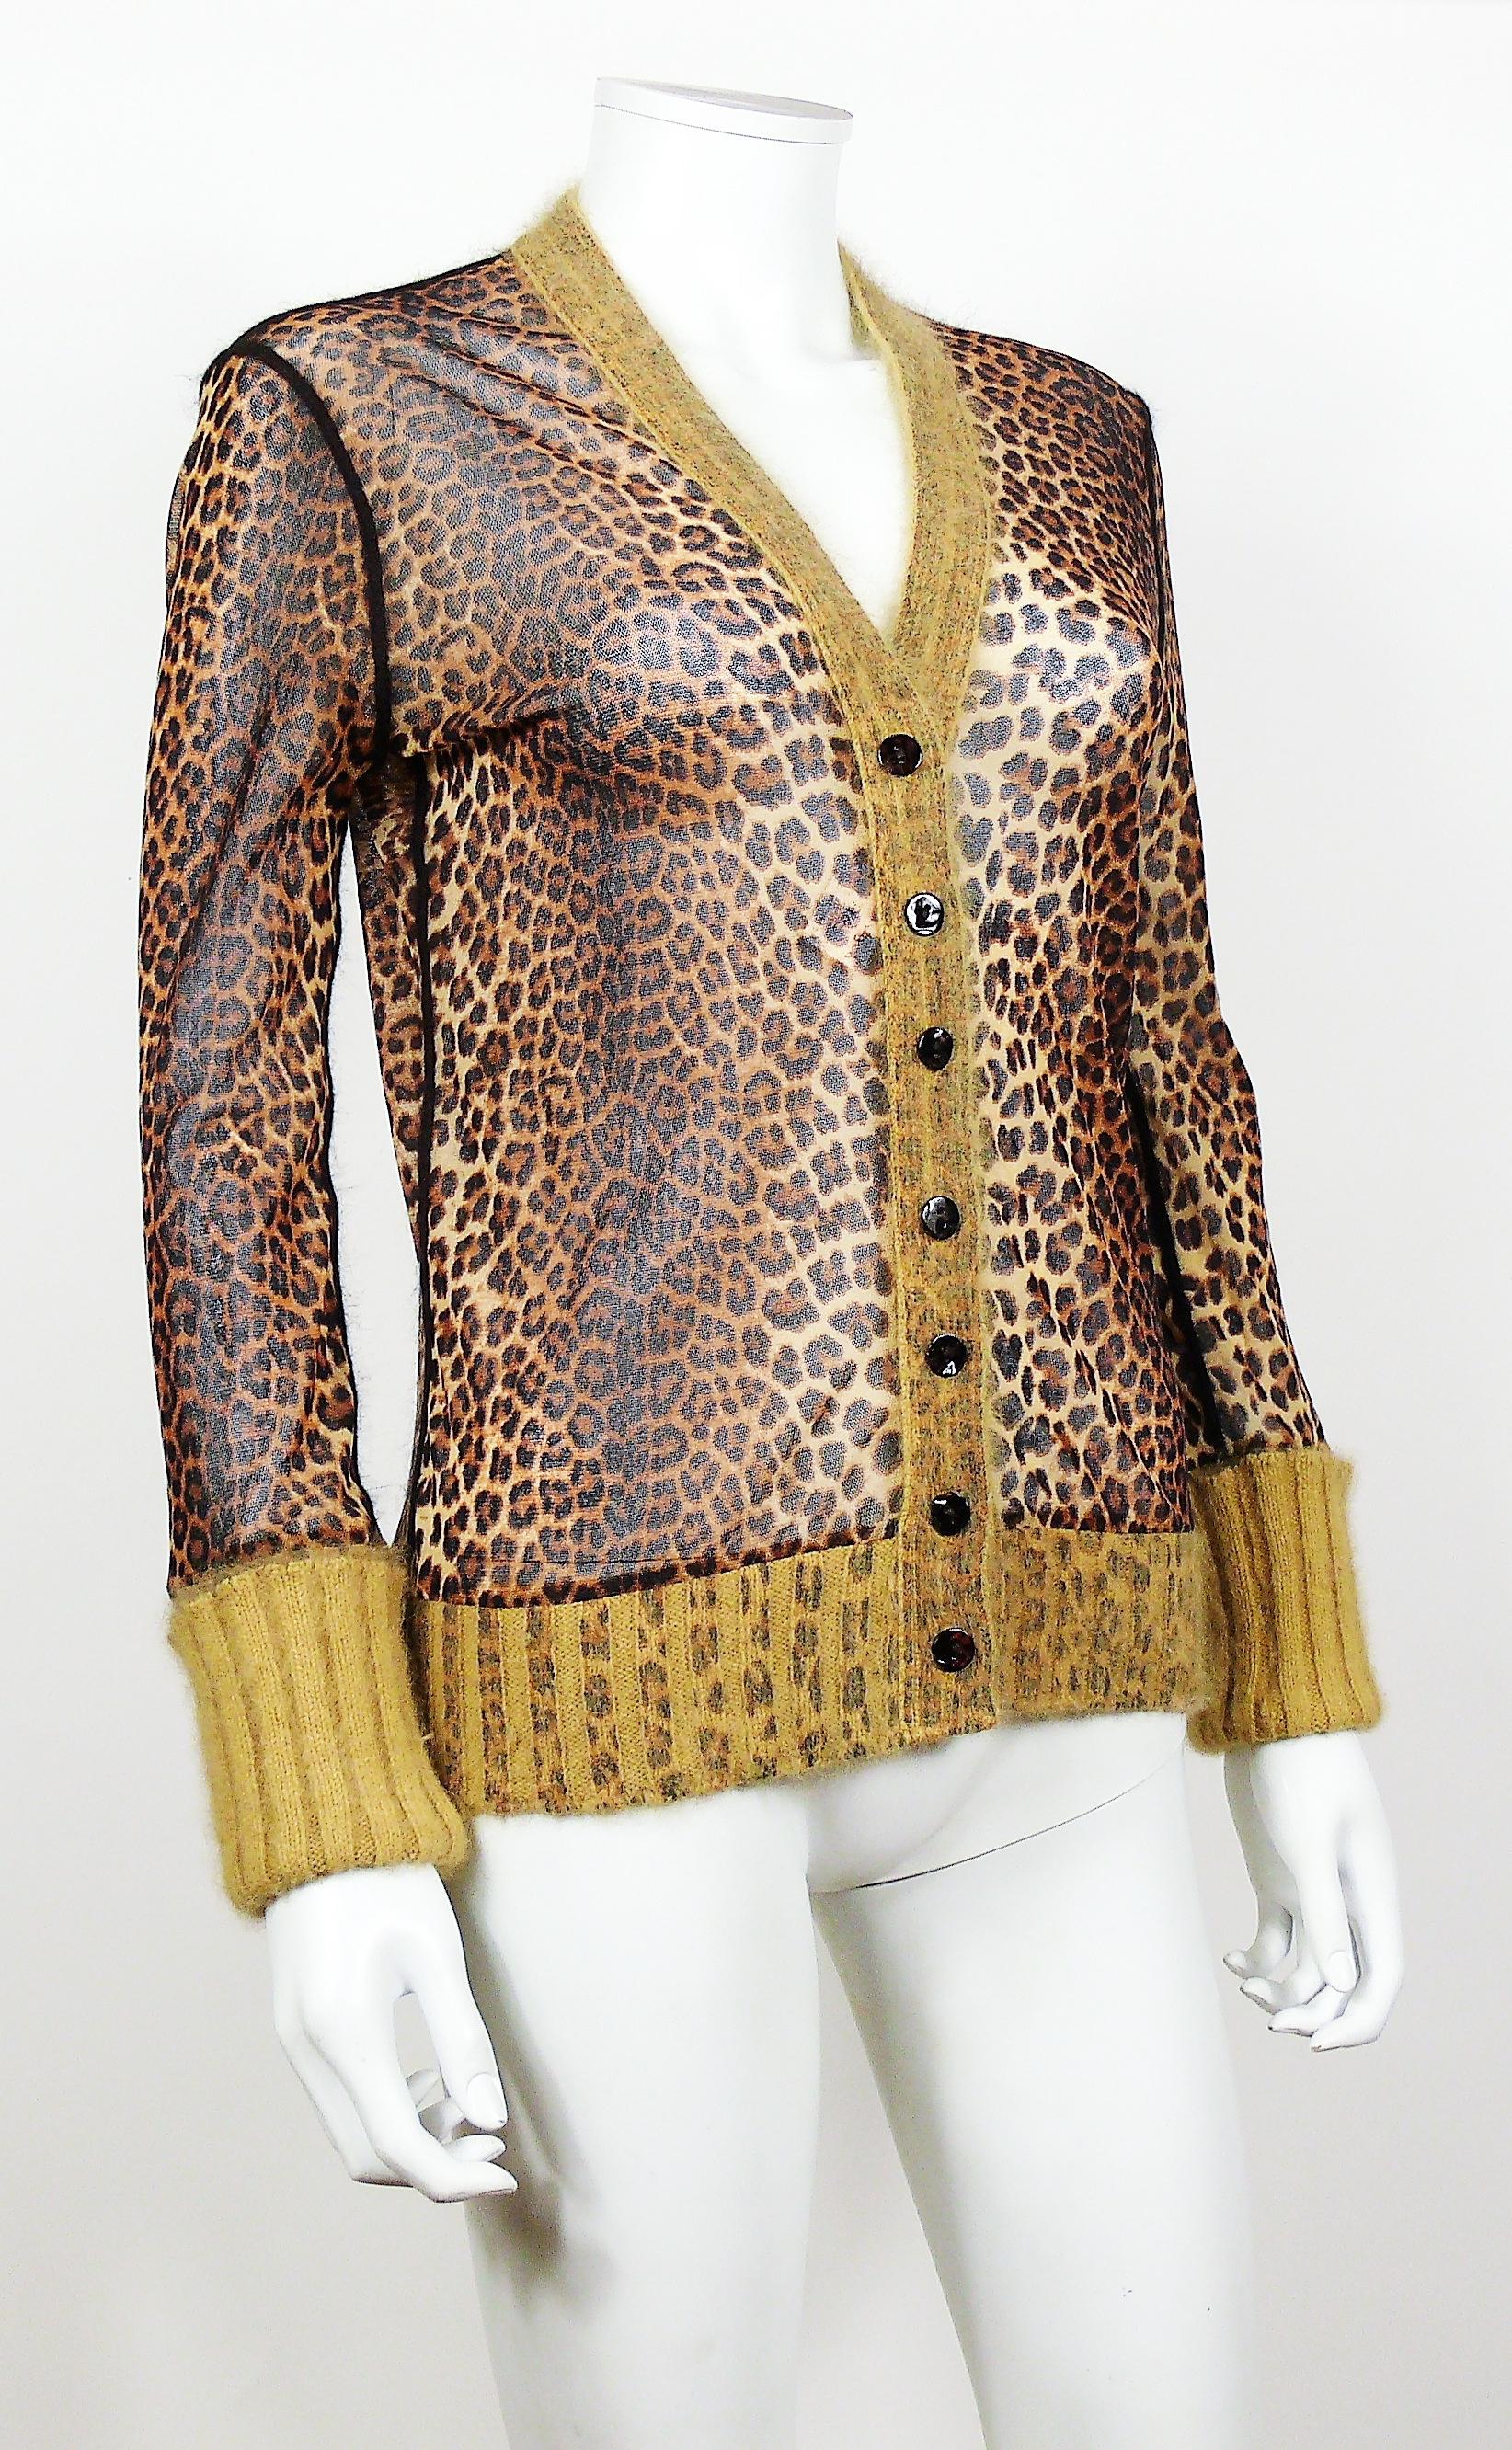 JEAN PAUL GAULTIER Fuzzi sheer mesh cardigan with cheetah print featuring fantastic angora wool collar, cuffs and bottom.

Label reads JEAN PAUL GAULTIER Maille Femme Made in Italy.

Size tag reads : M.

Composition tag reads : 100%